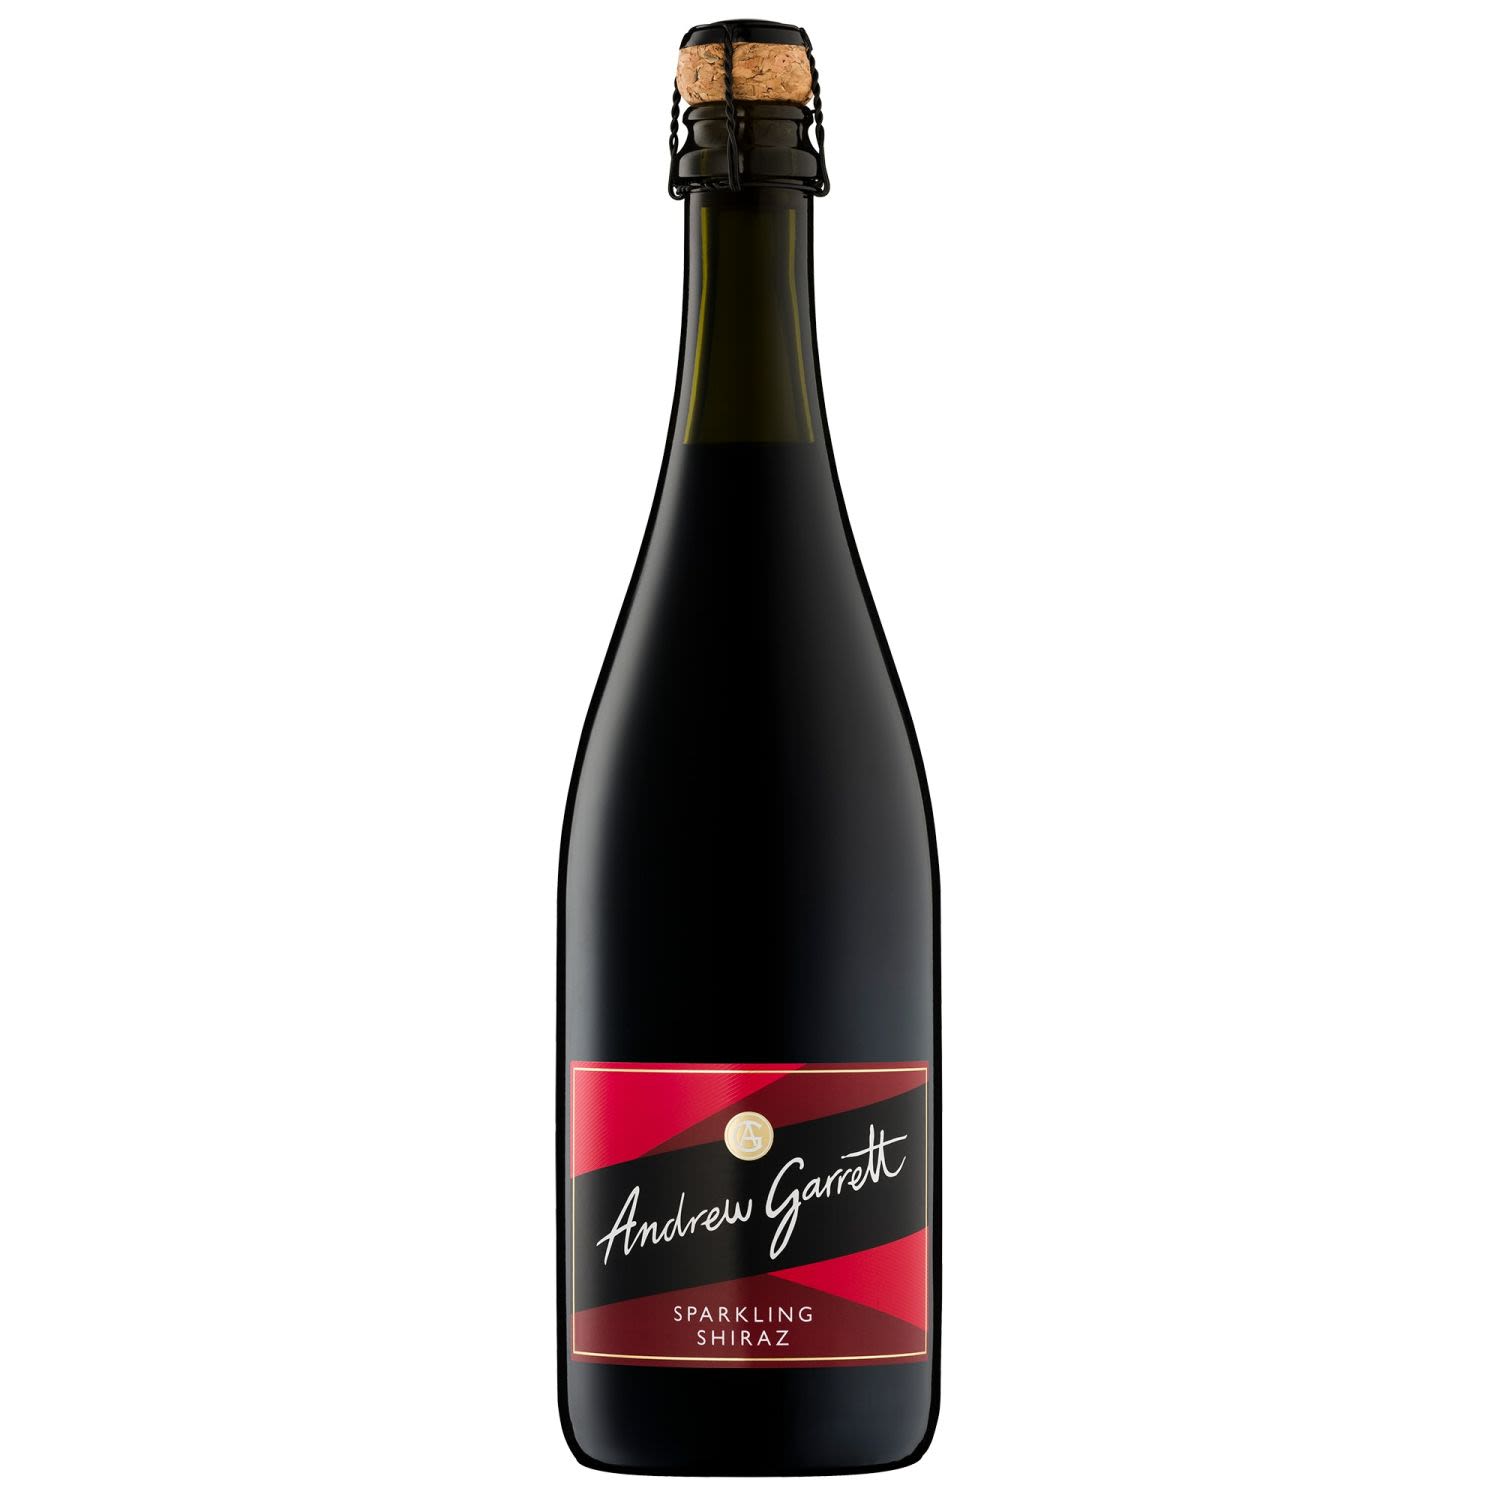 Andrew Garrett Sparkling Shiraz - Rich fruit characters with aromas of spiced cherries and plum. The Andrew Garrett Sparkling Shiraz has a crisp and fresh finish with lingering black currant flavours.<br /> <br />Alcohol Volume: 13.00%<br /><br />Pack Format: Bottle<br /><br />Standard Drinks: 7.7<br /><br />Pack Type: Bottle<br /><br />Country of Origin: Australia<br /><br />Region: McLaren Vale<br /><br />Vintage: Non Vintage<br />